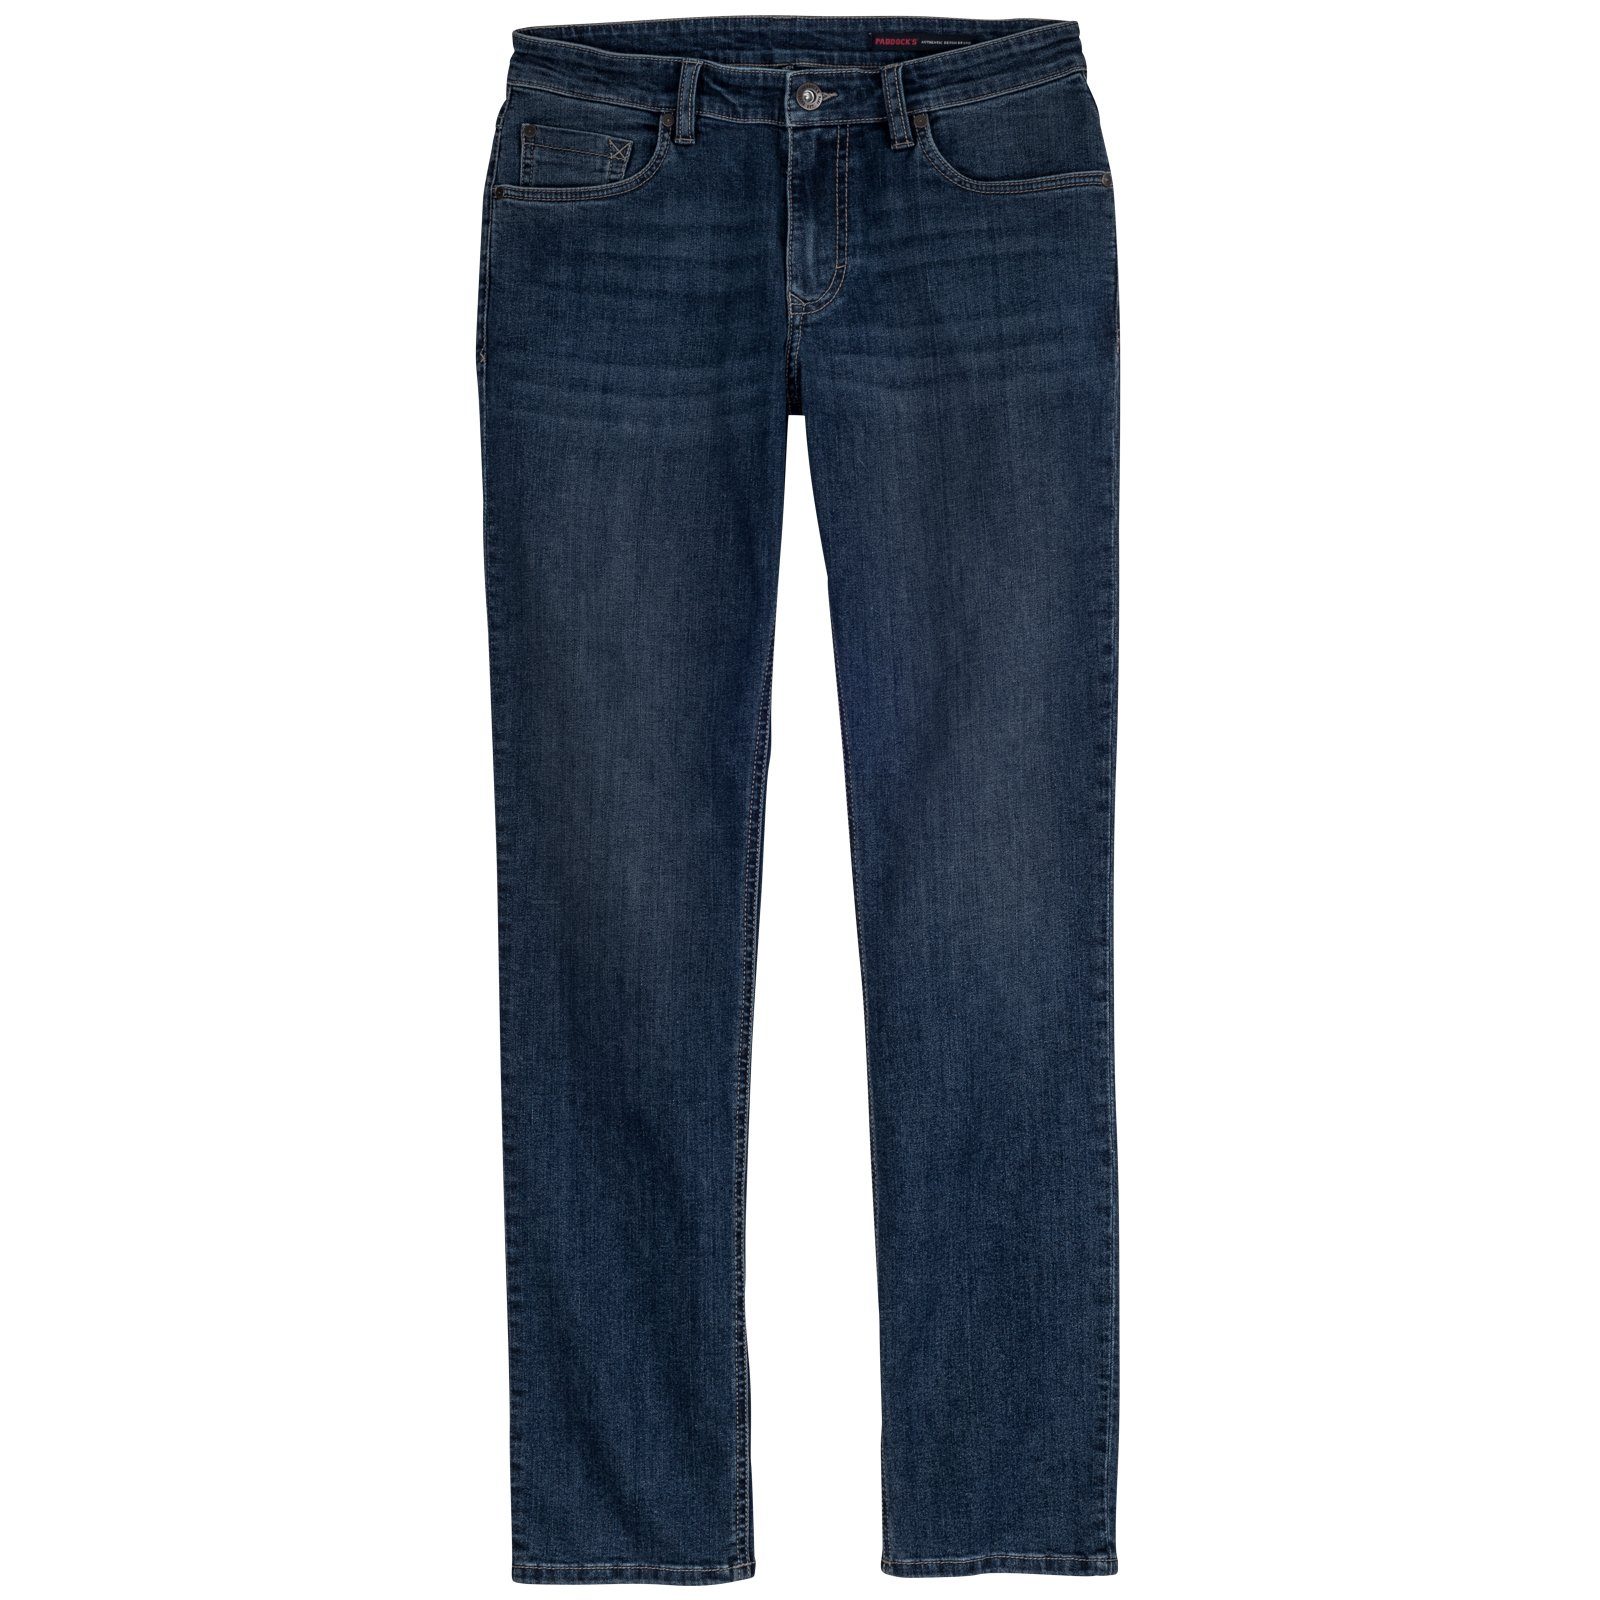 Paddock's Bequeme Jeans Paddock's XXL Jeans moustache blue use rinse Ben